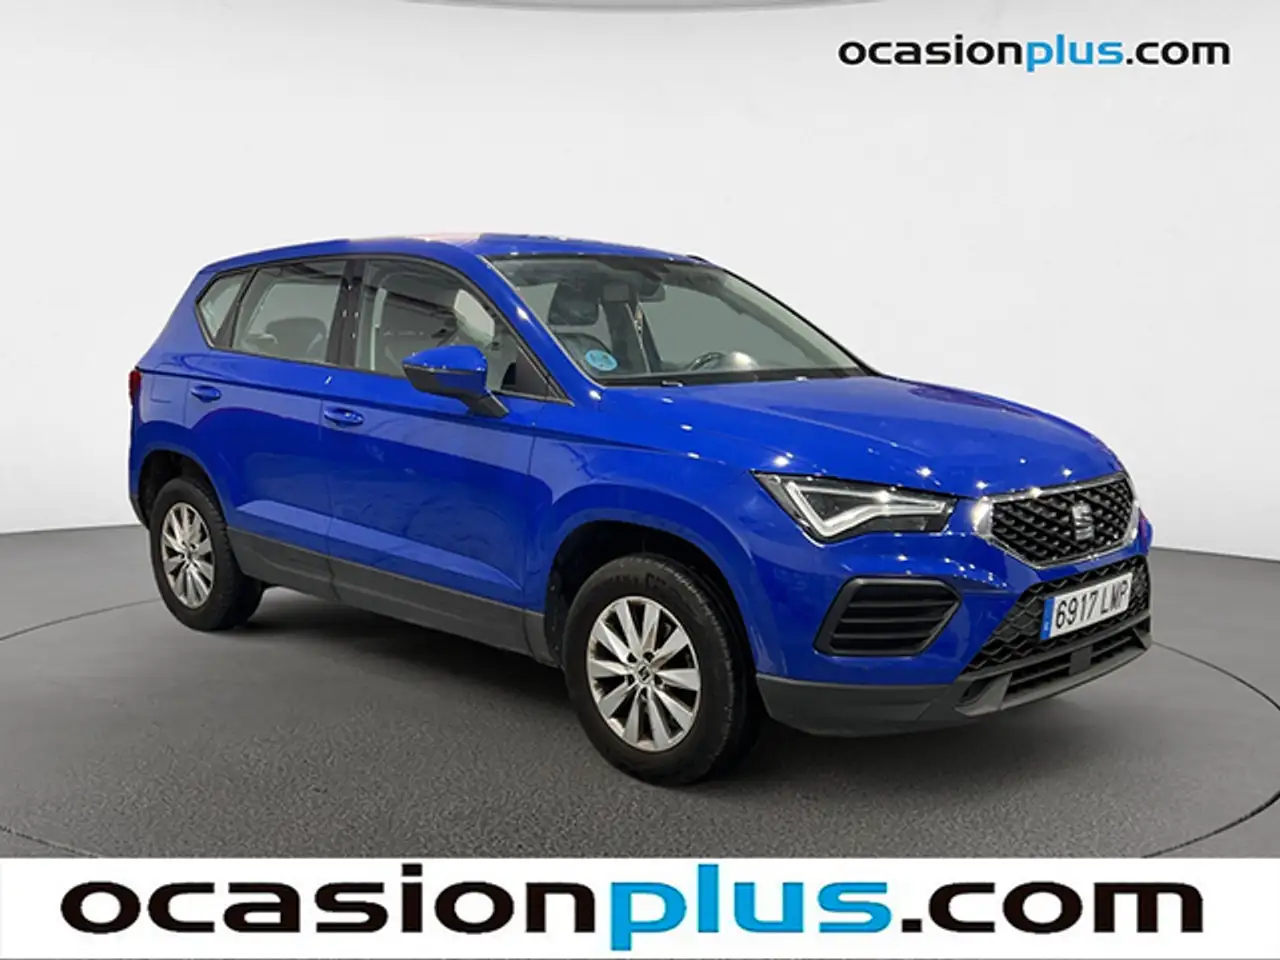  Renting SEAT Ateca 1.0 TSI S&S Reference Azul 2